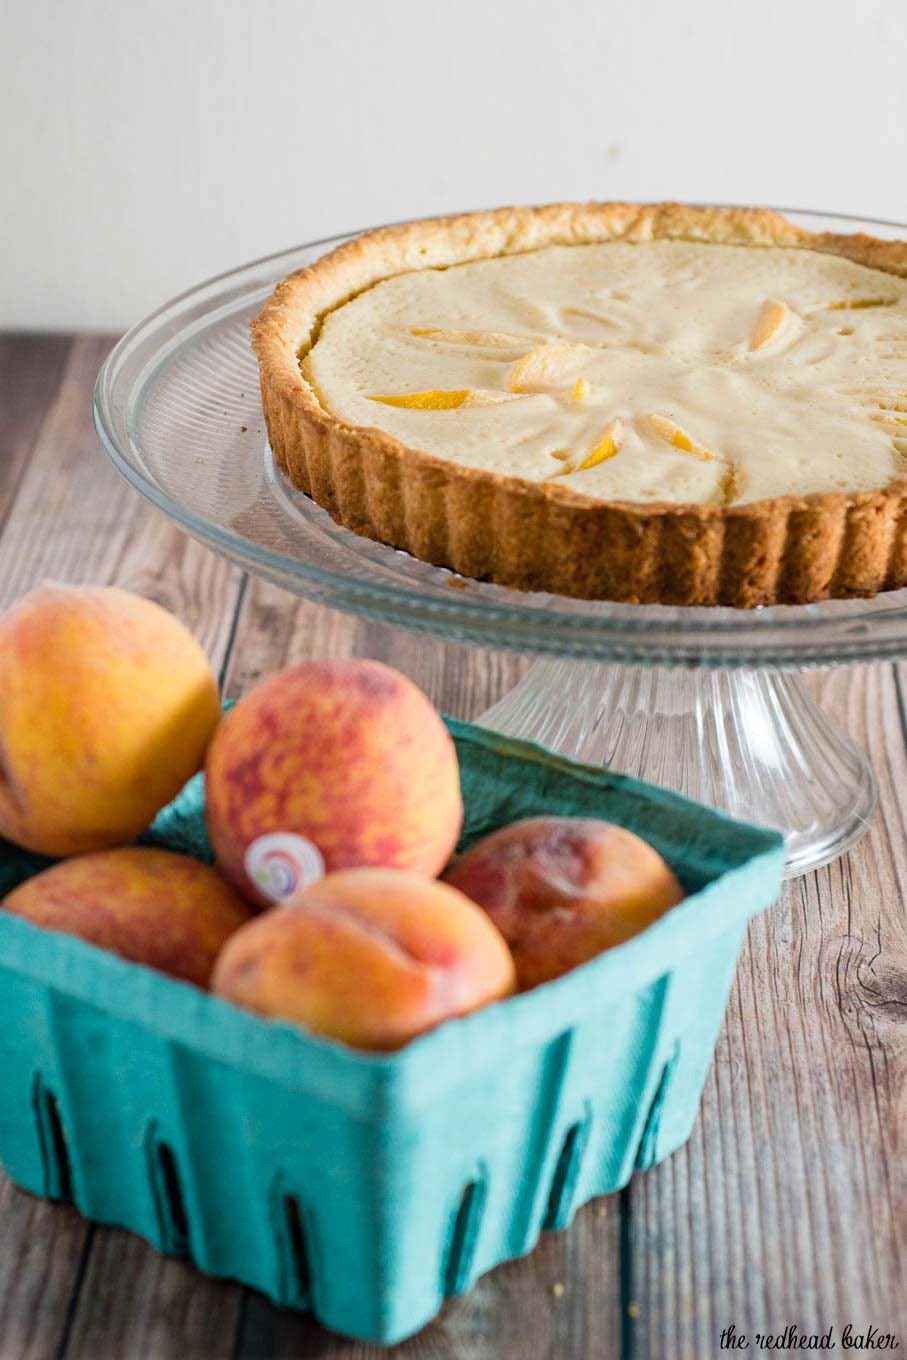 This peach custard tart has a crumbly cookie crust and a creamy custard filling loaded with tender peach slices. It's a delicious end to any meal! #BrunchWeek